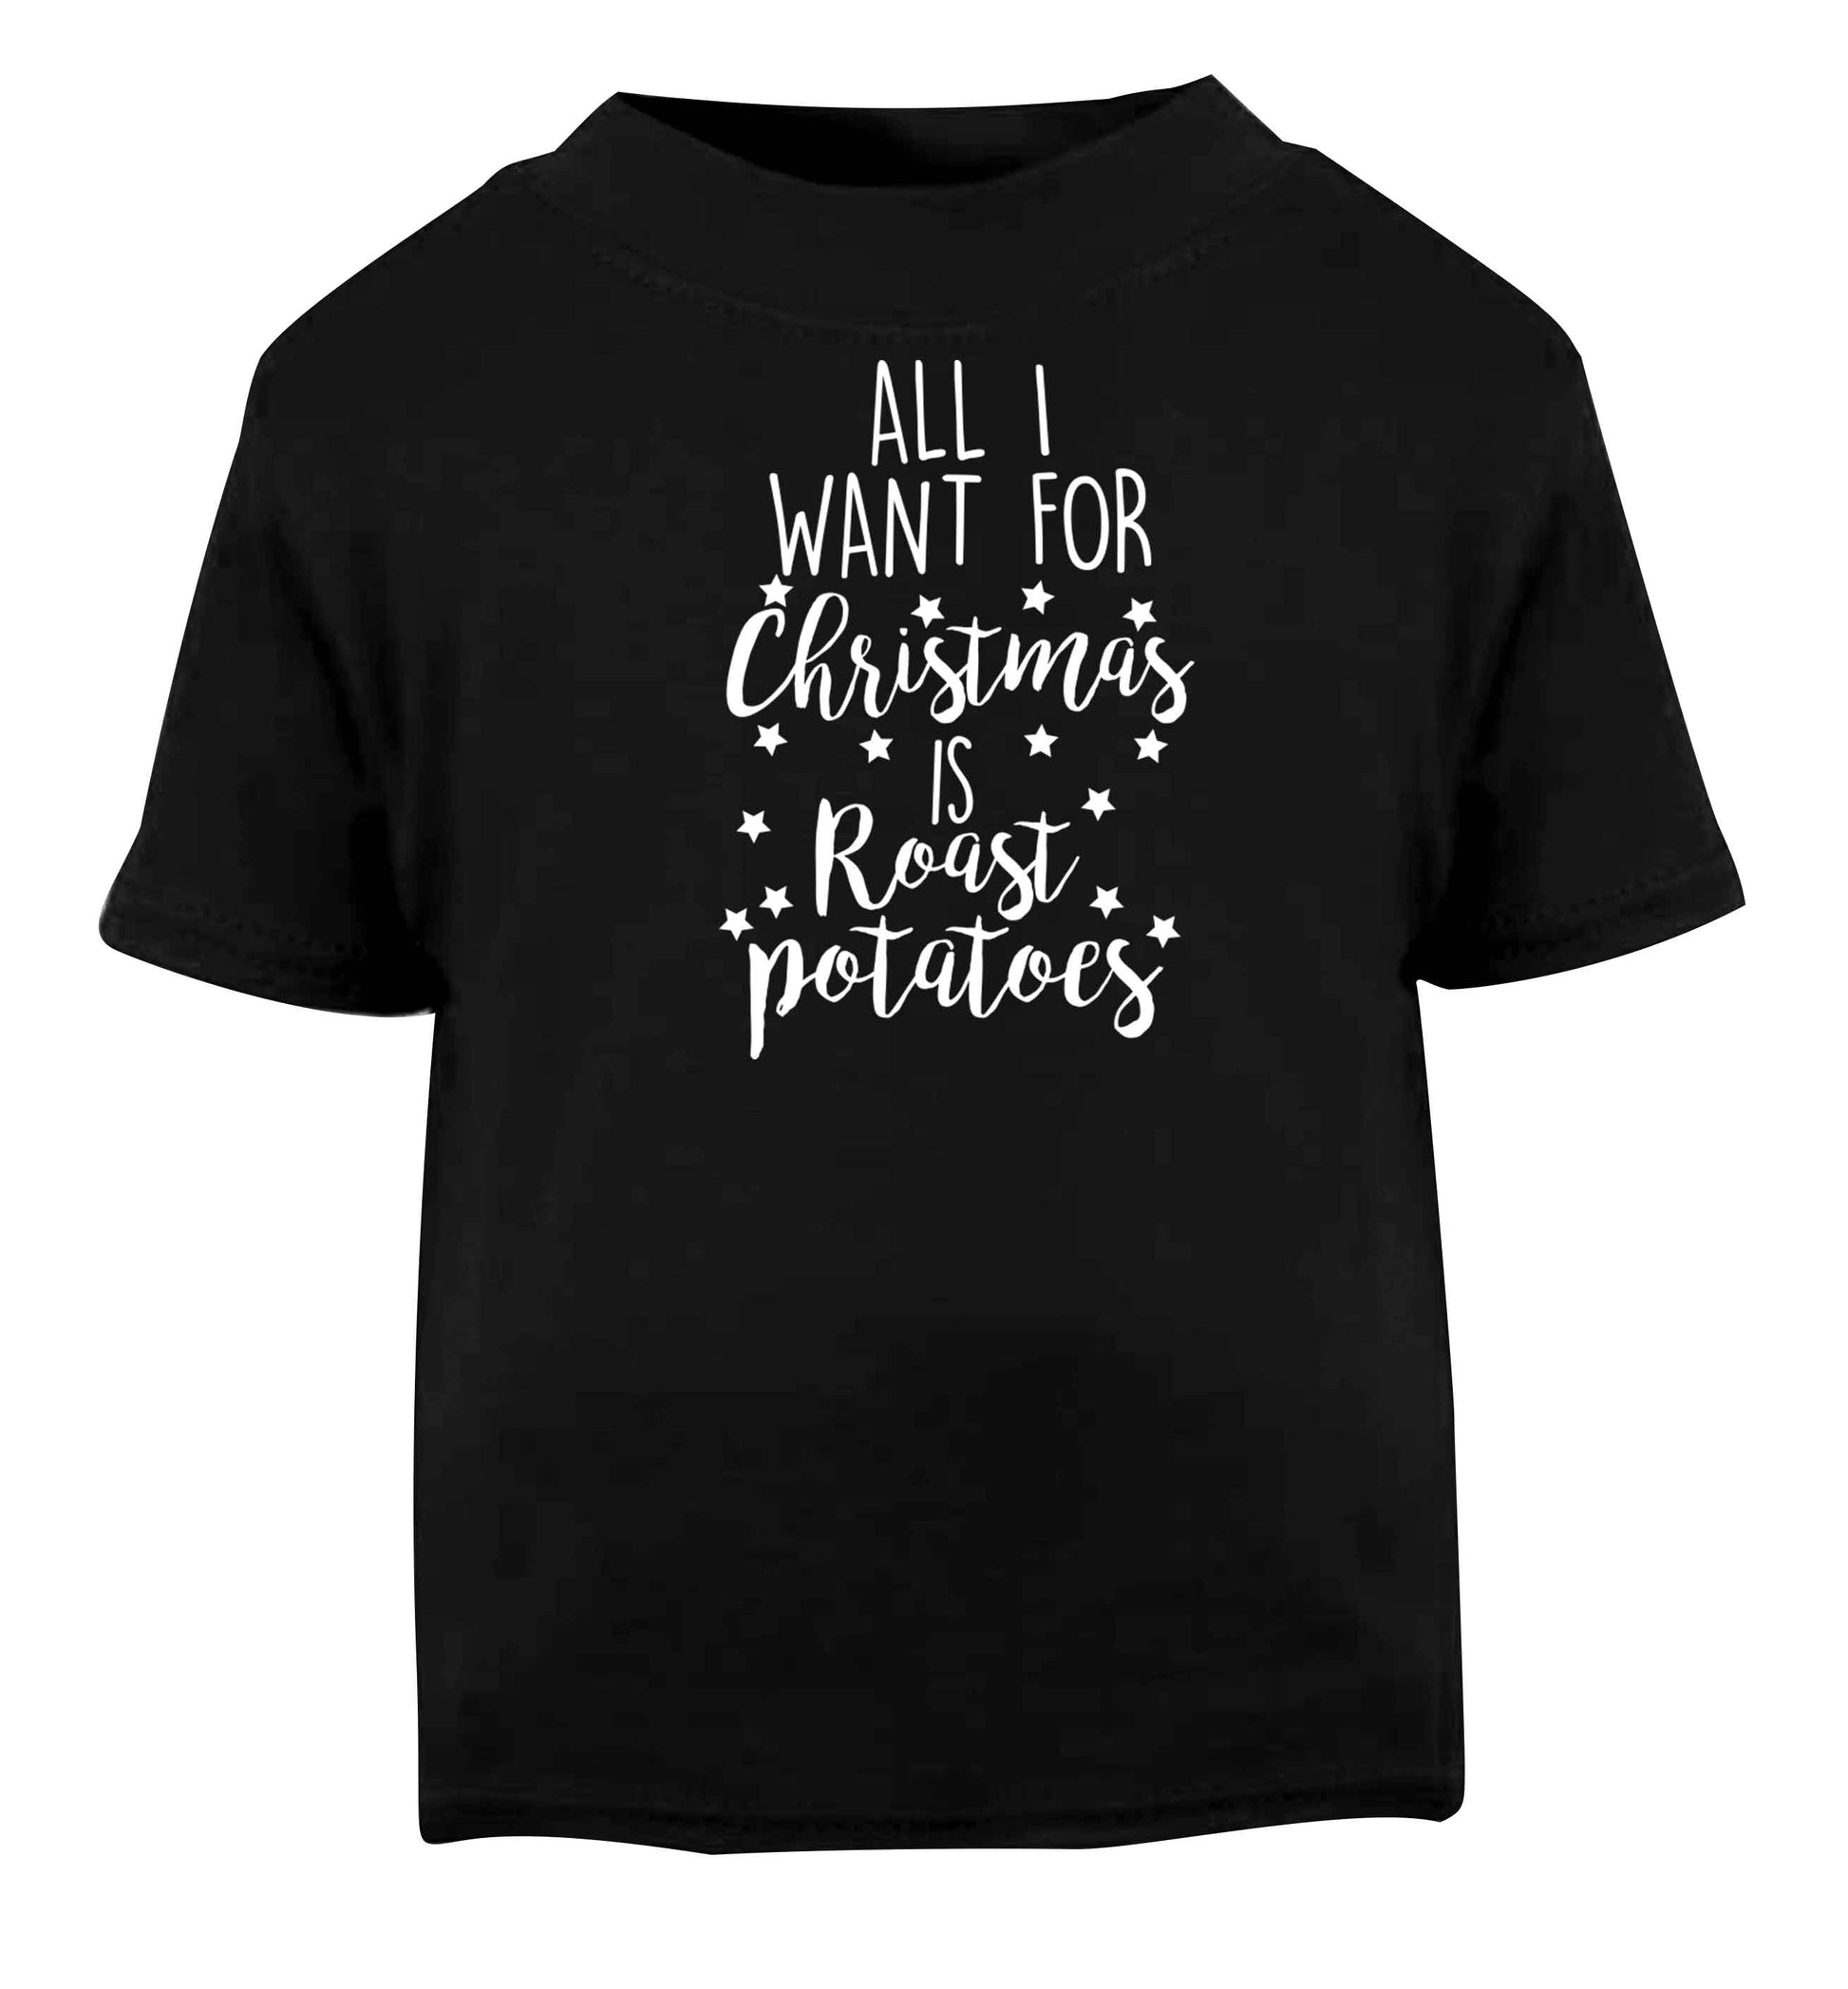 All I want for Christmas is roast potatoes Black baby toddler Tshirt 2 years